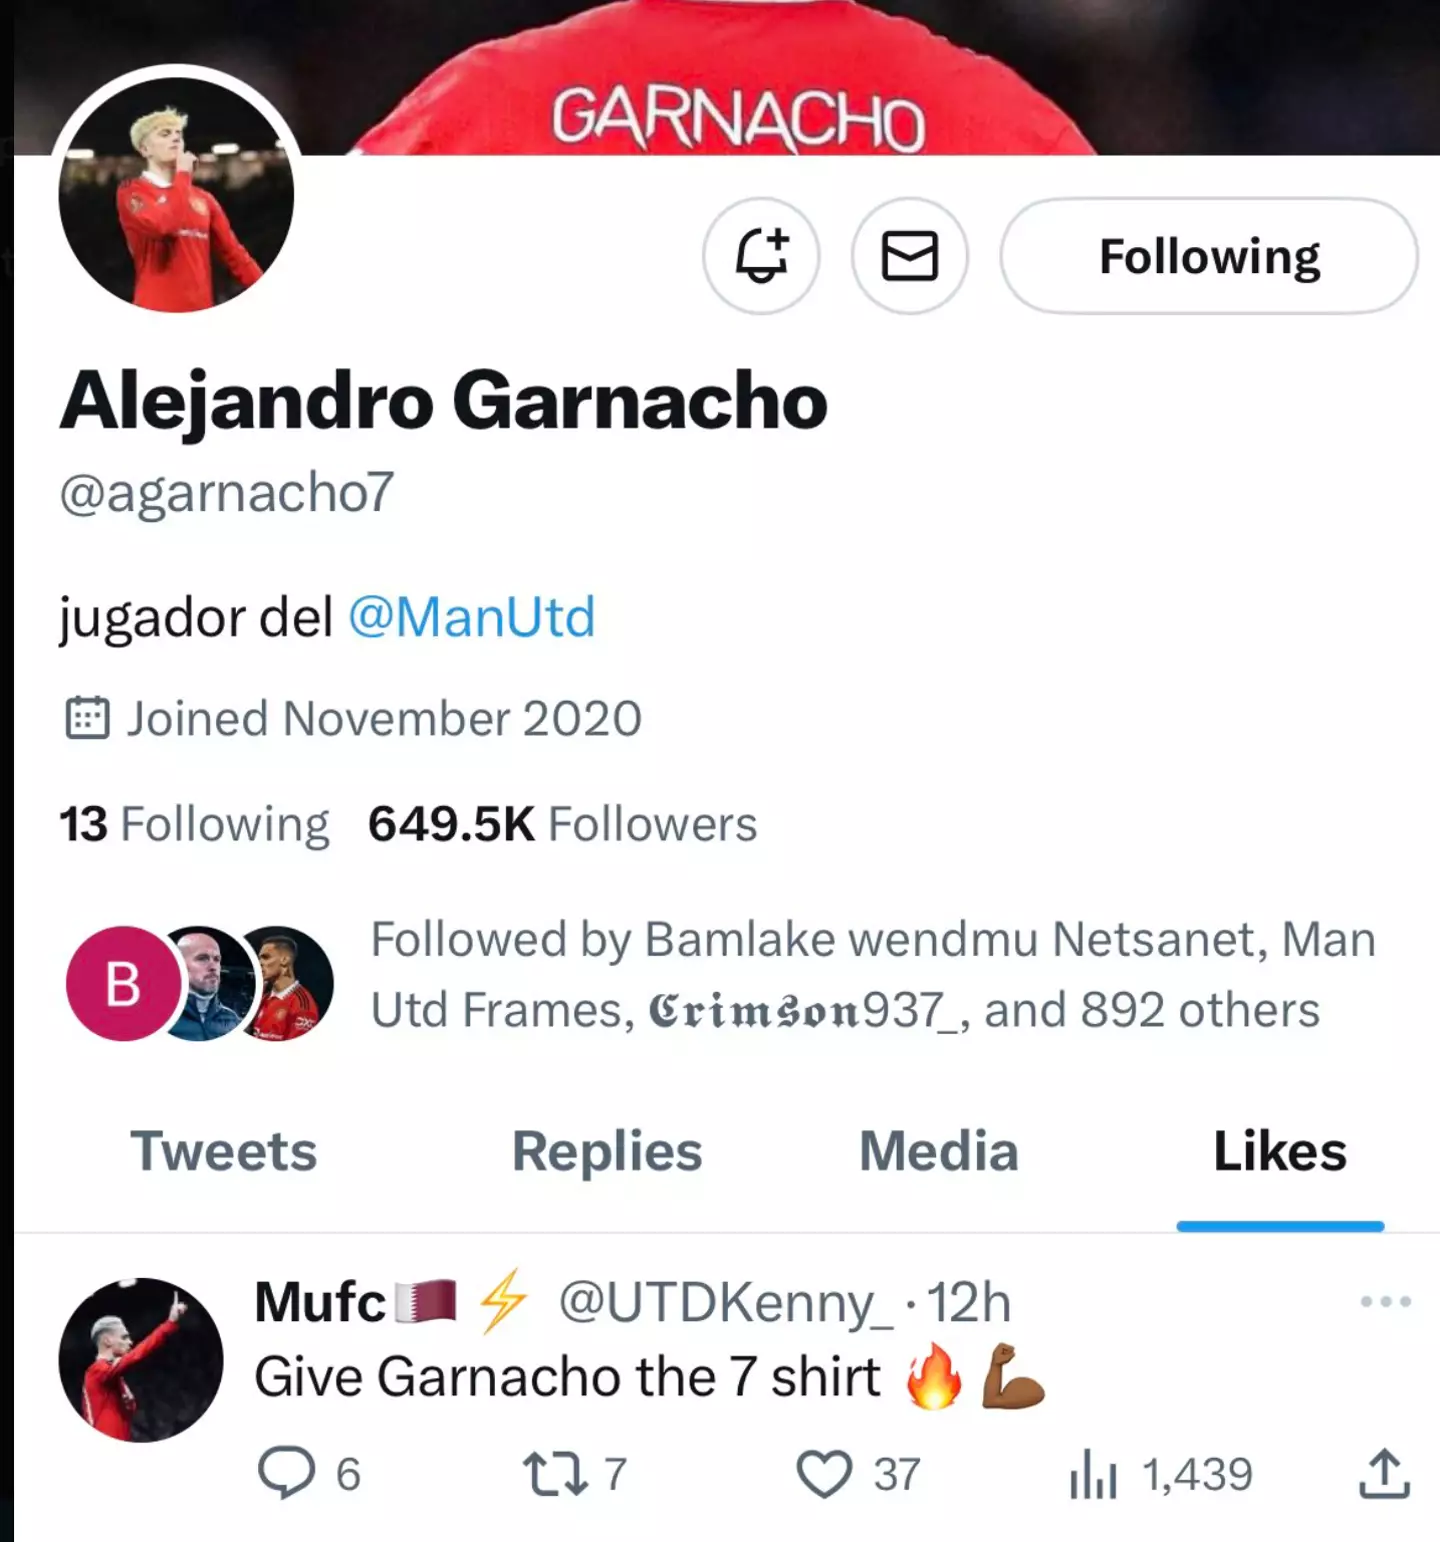 Garnancho was spotted 'liking' a post about the iconic number 7 shirt on Twitter.